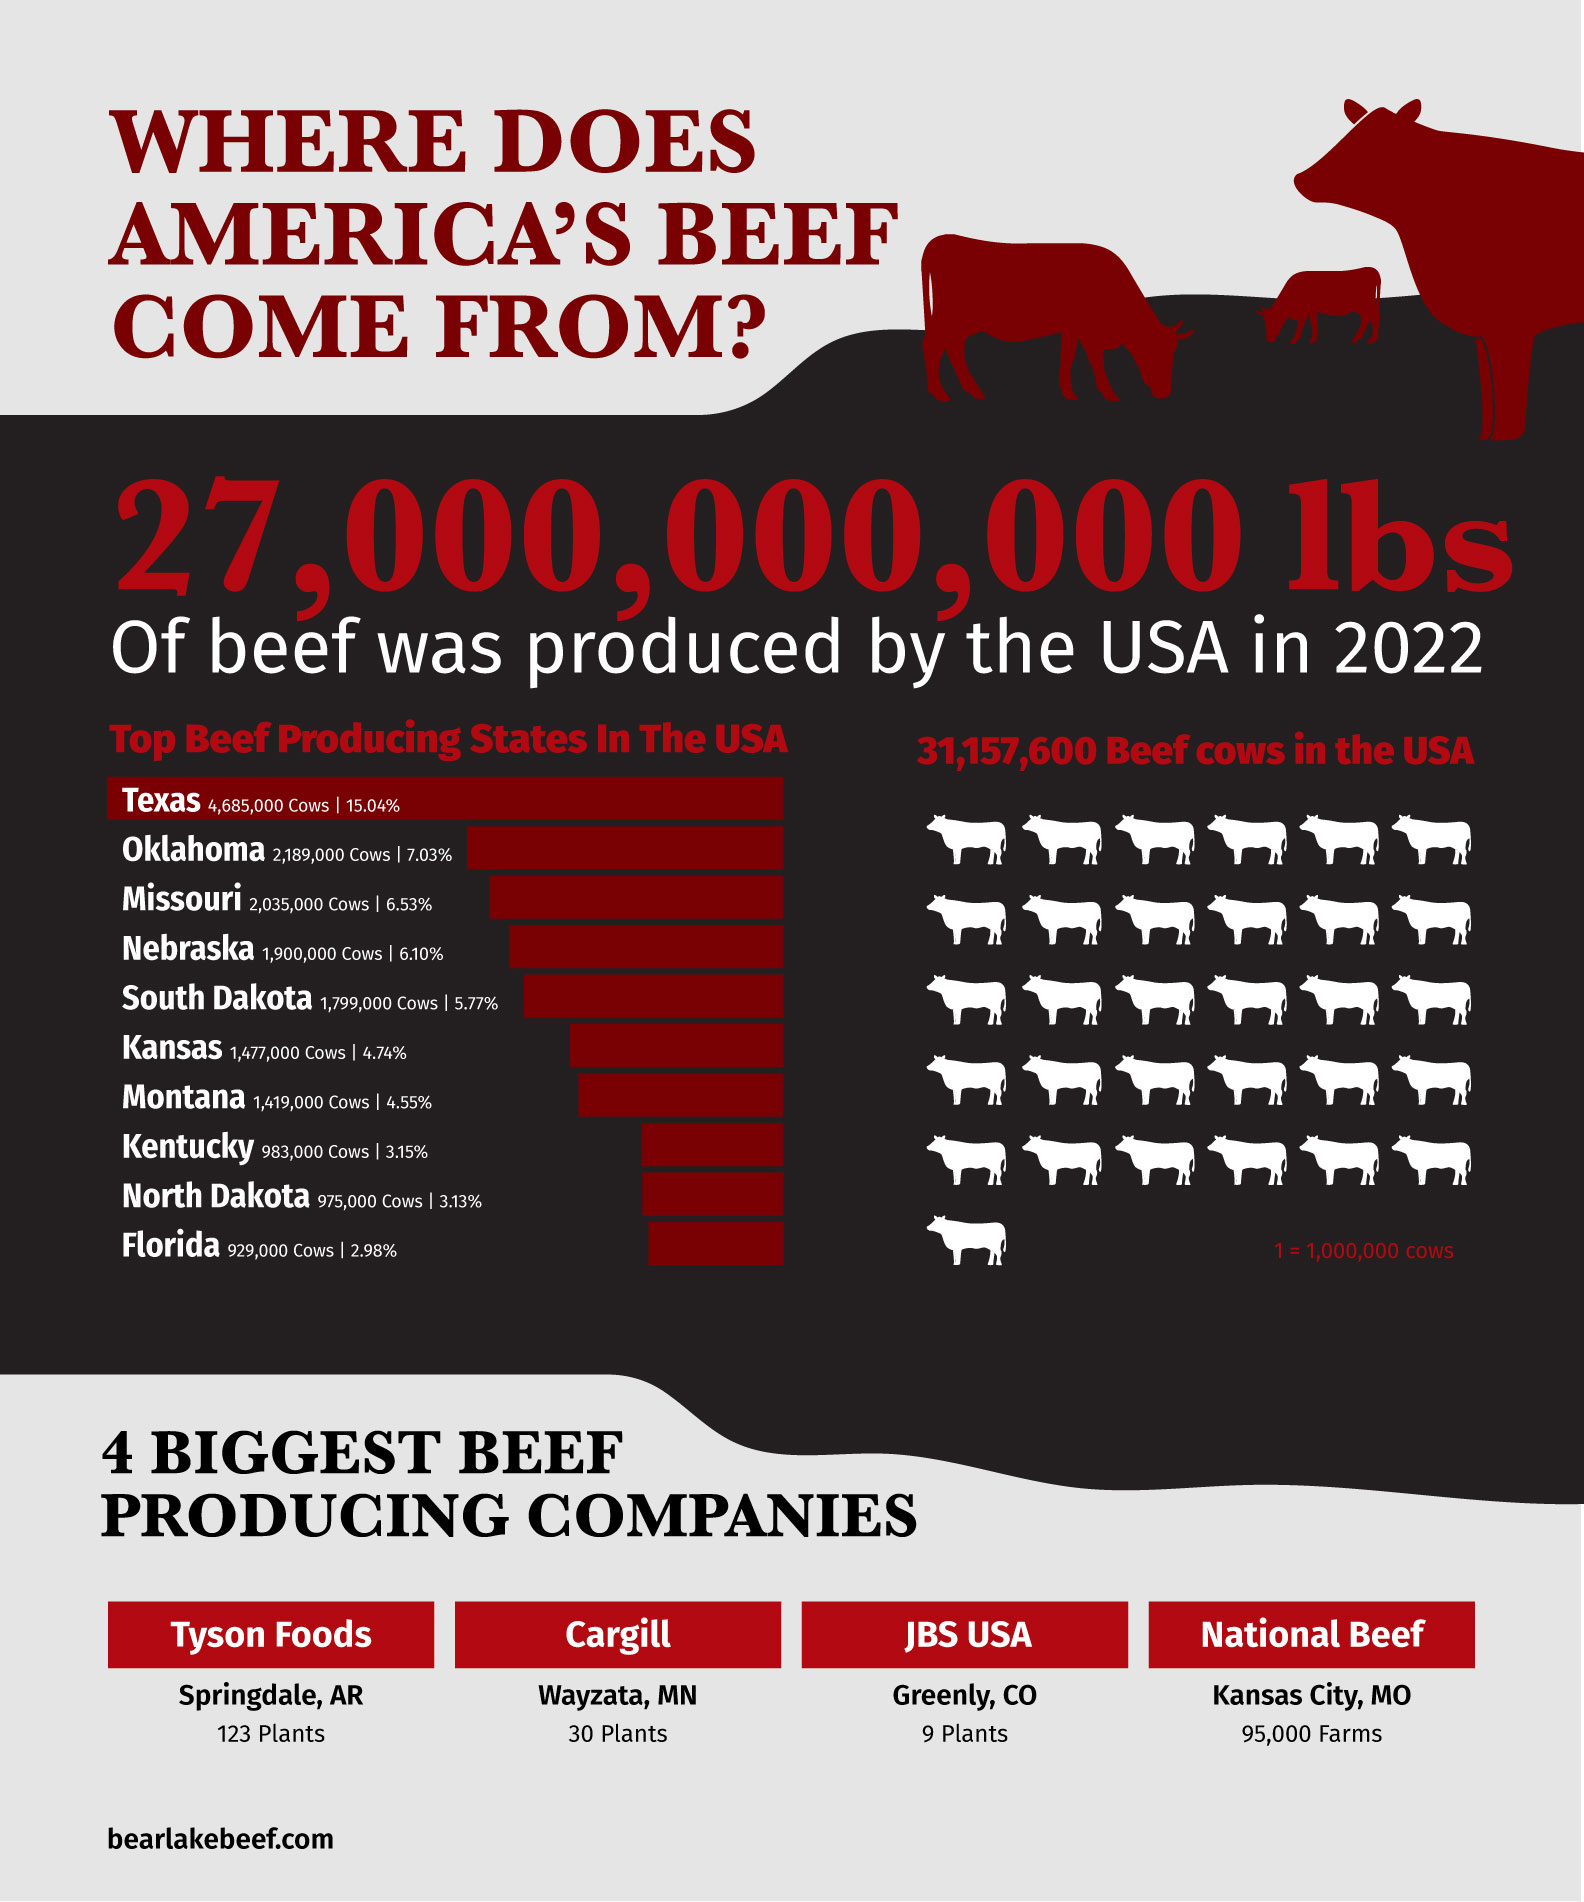 Where Does America's Beef Come From?